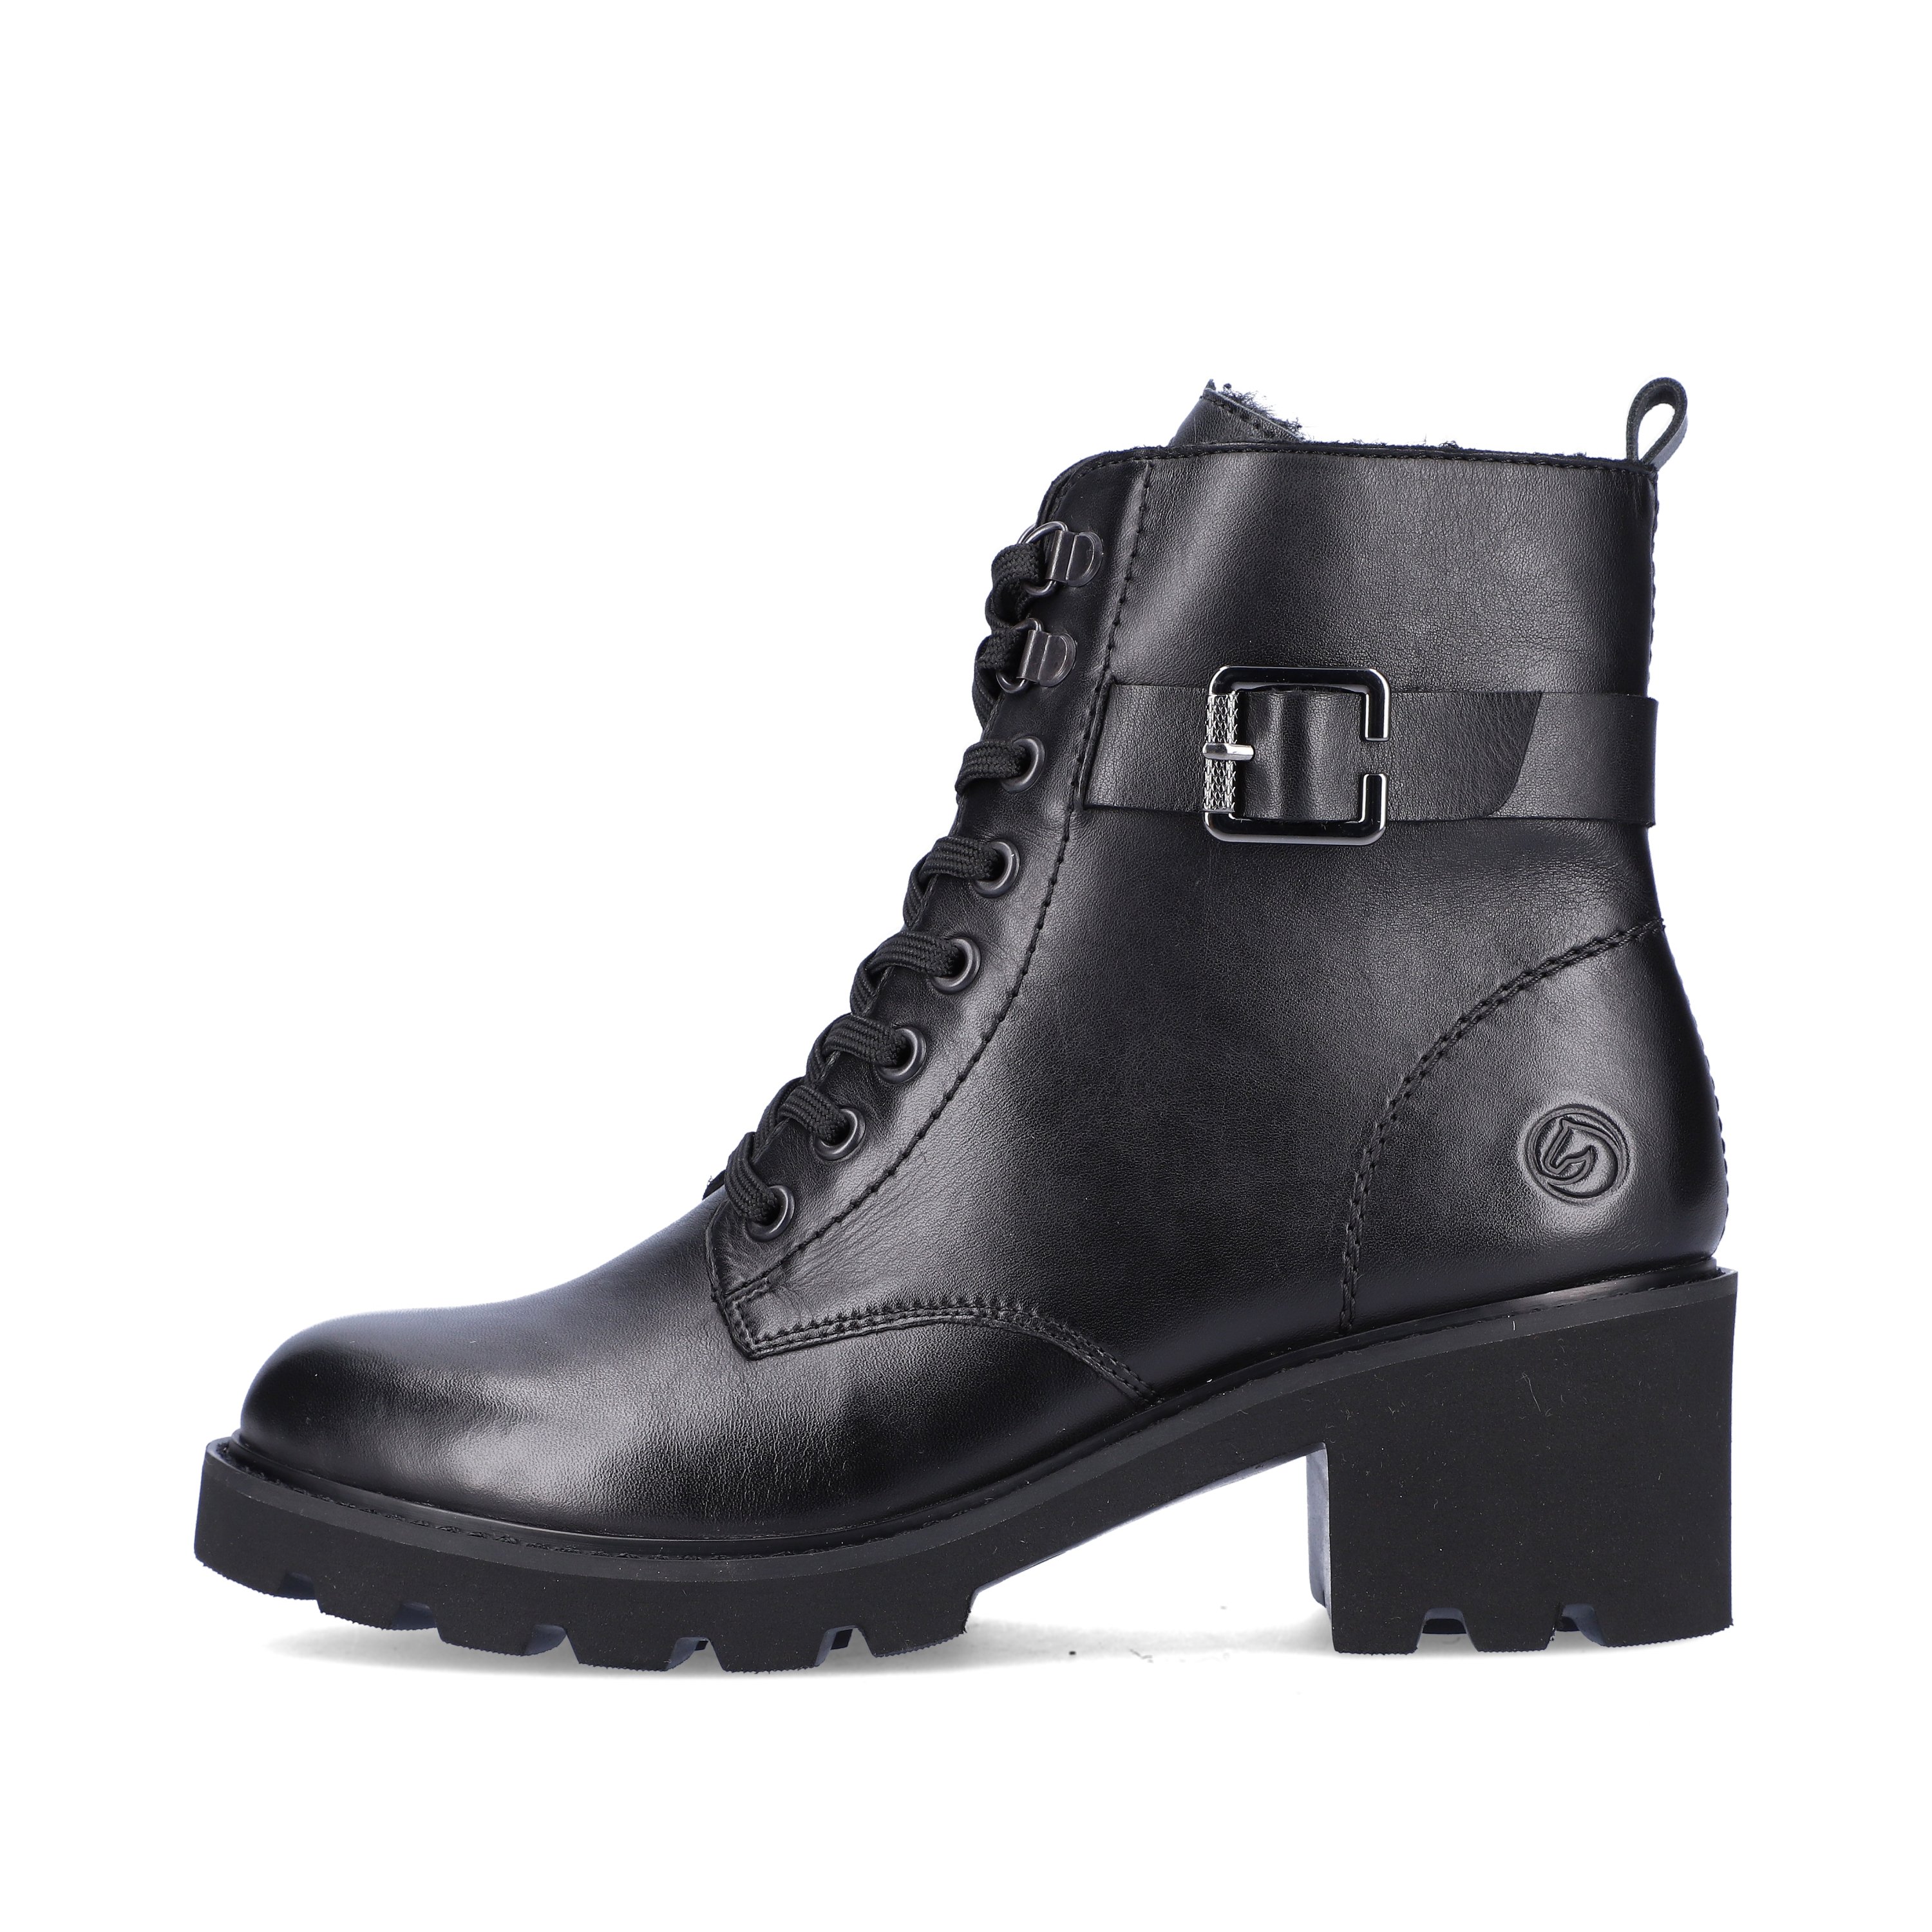 Glossy black remonte women´s biker boots D0A74-01 with especially light sole. The outside of the shoe